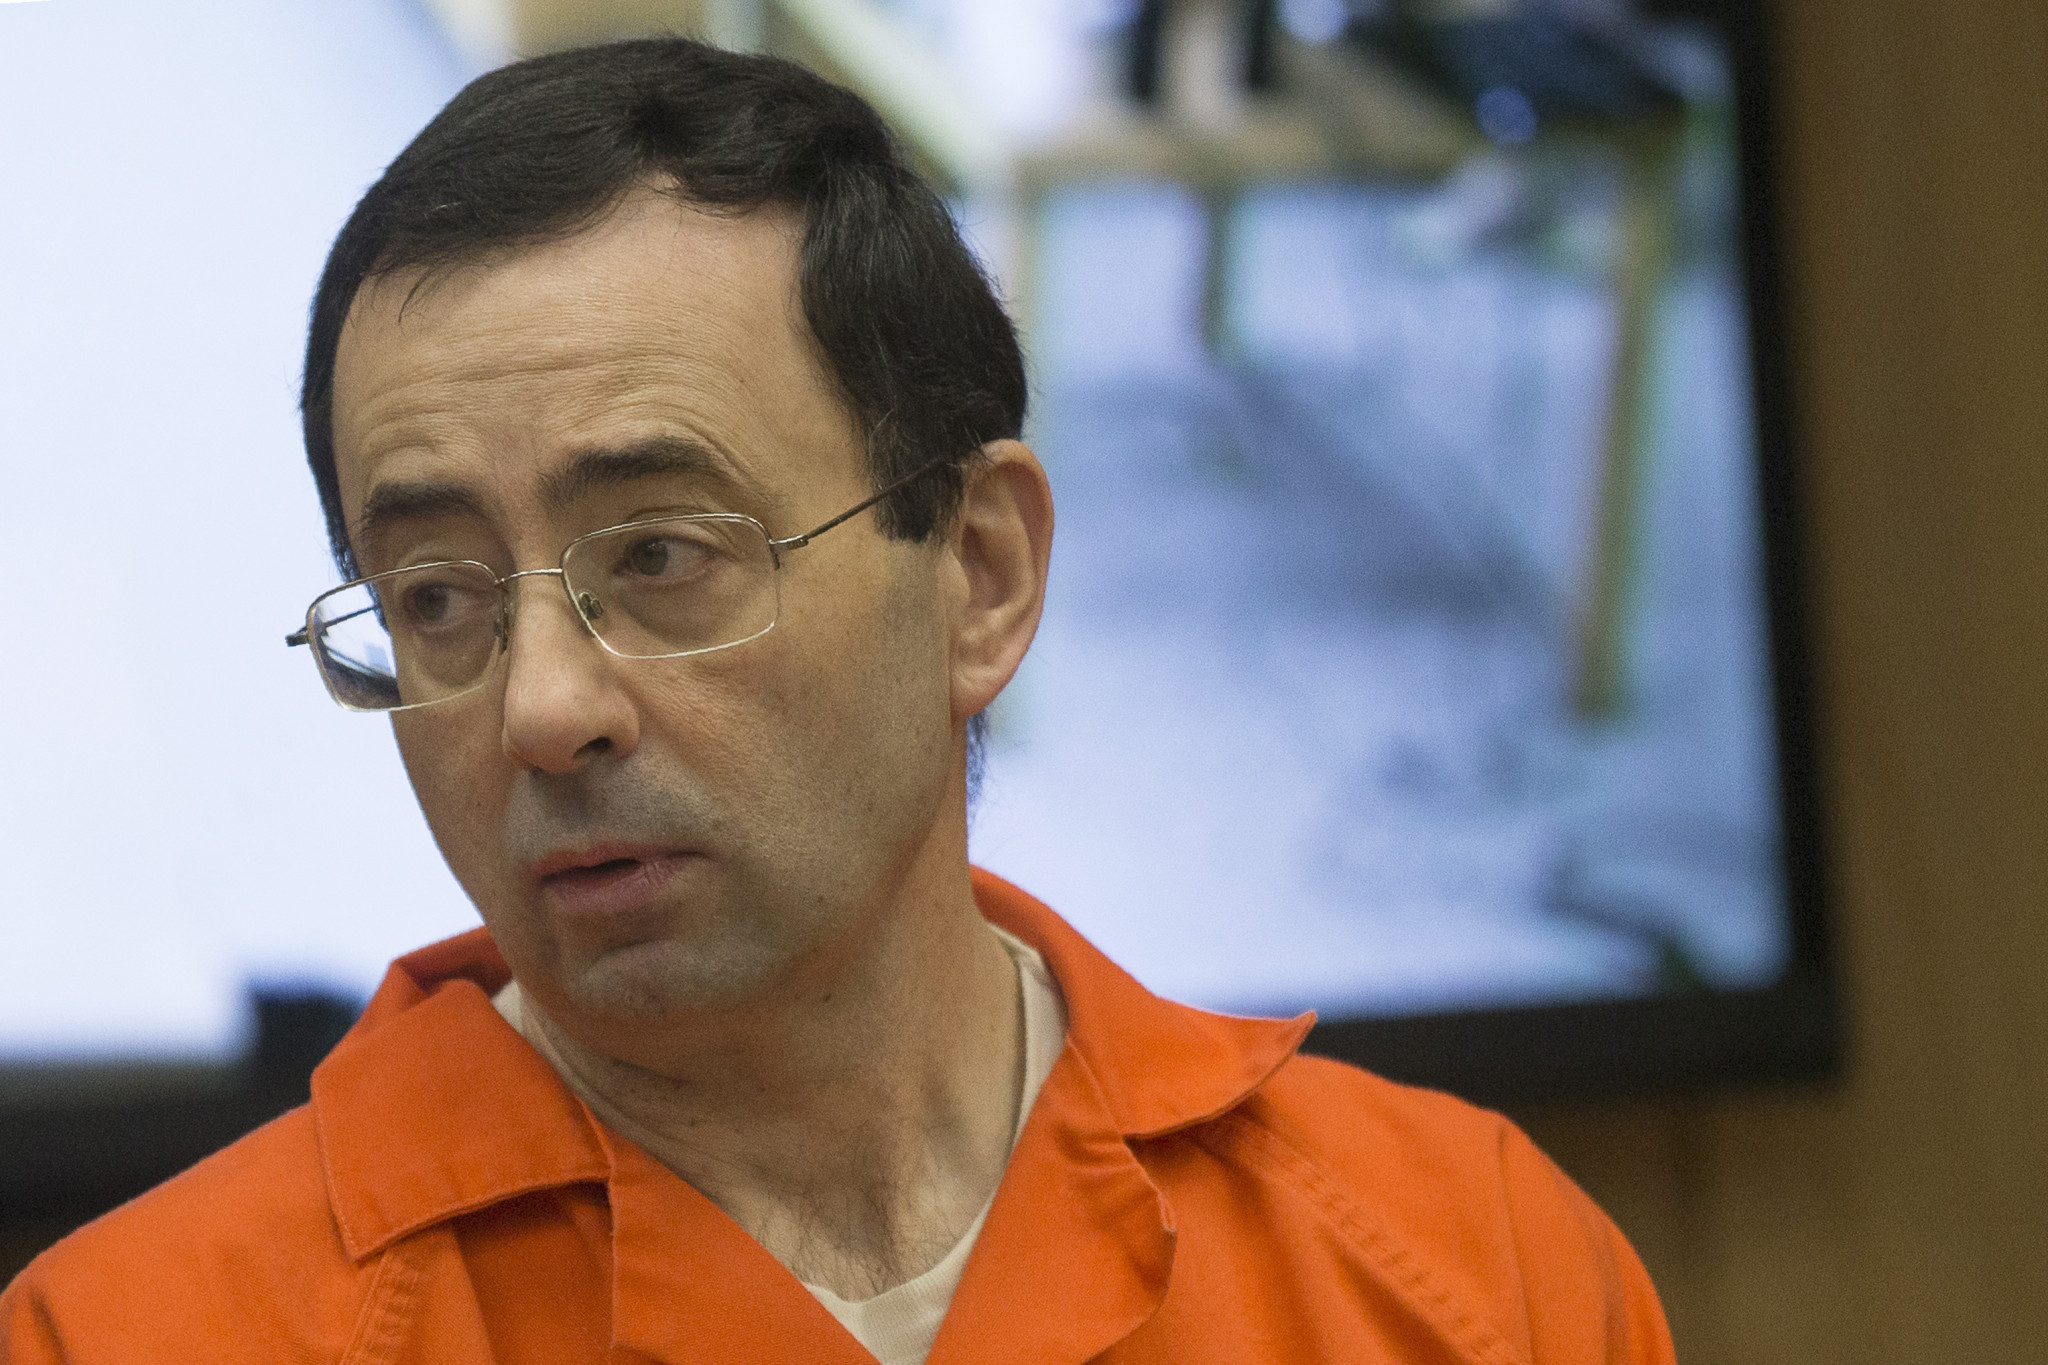 The election of the new Board of Directors comes in the wake of the sexual abuse scandal involving former national team doctor Larry Nassar ©Getty Images